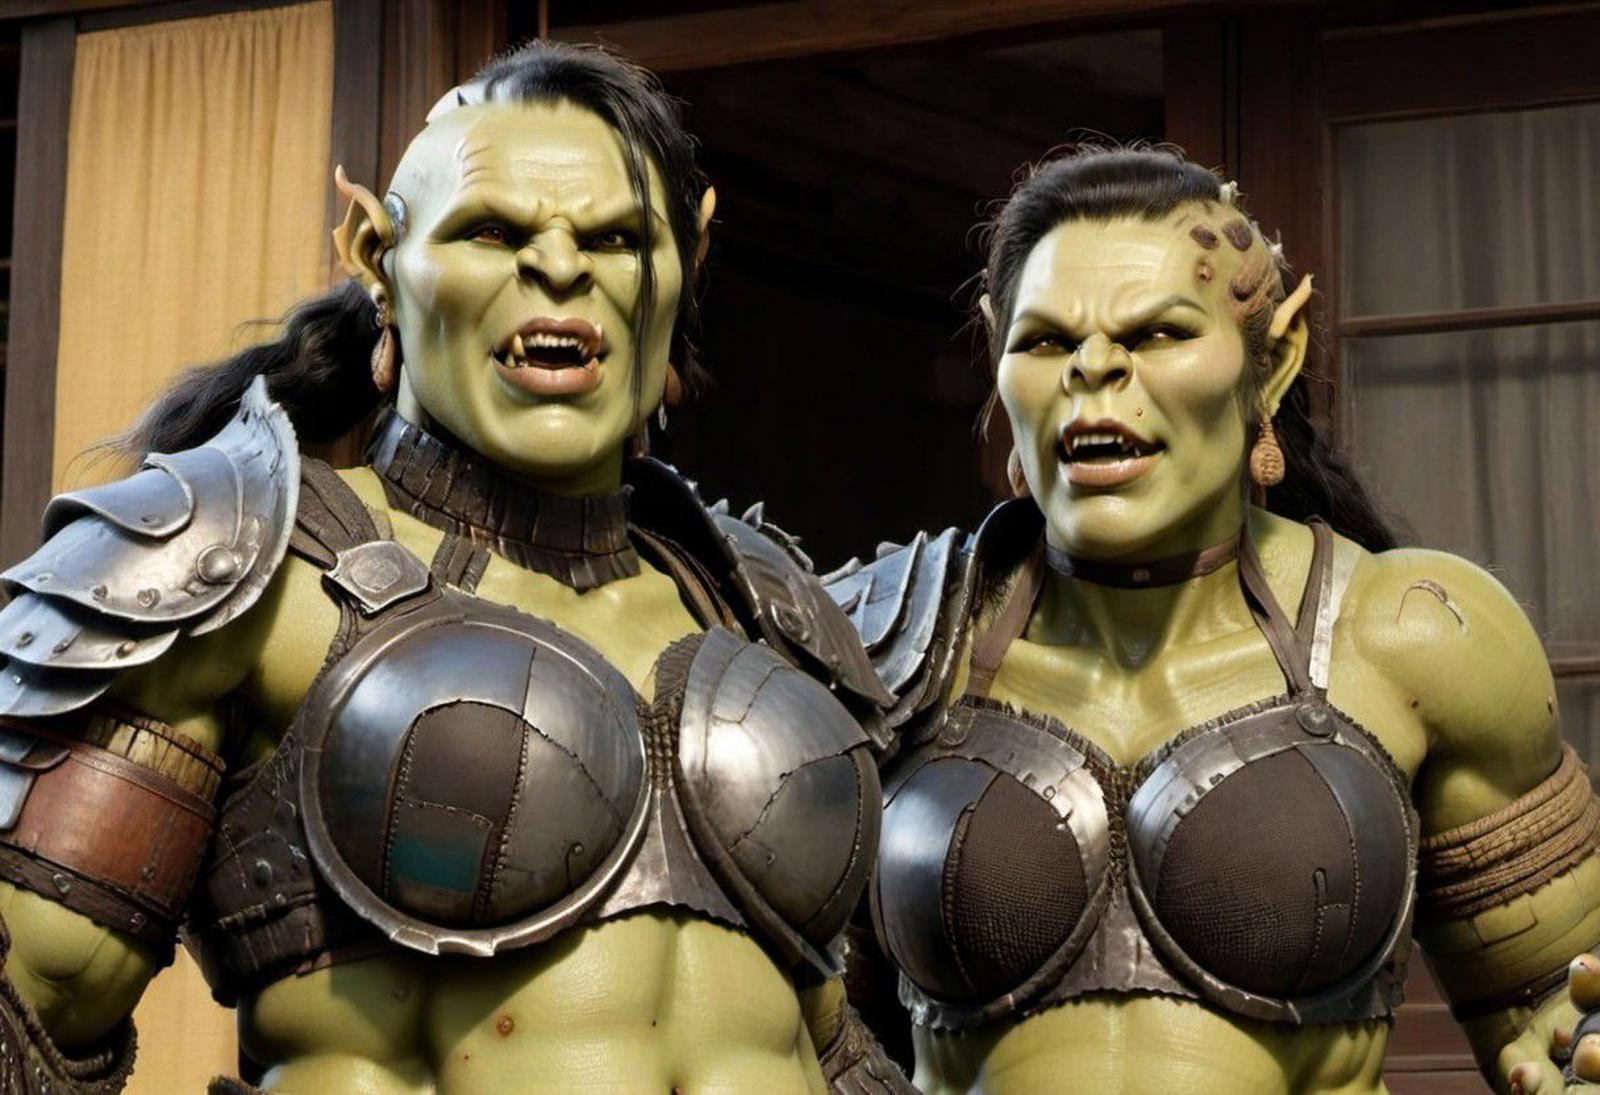 Female Orcs XL image by EagerScience